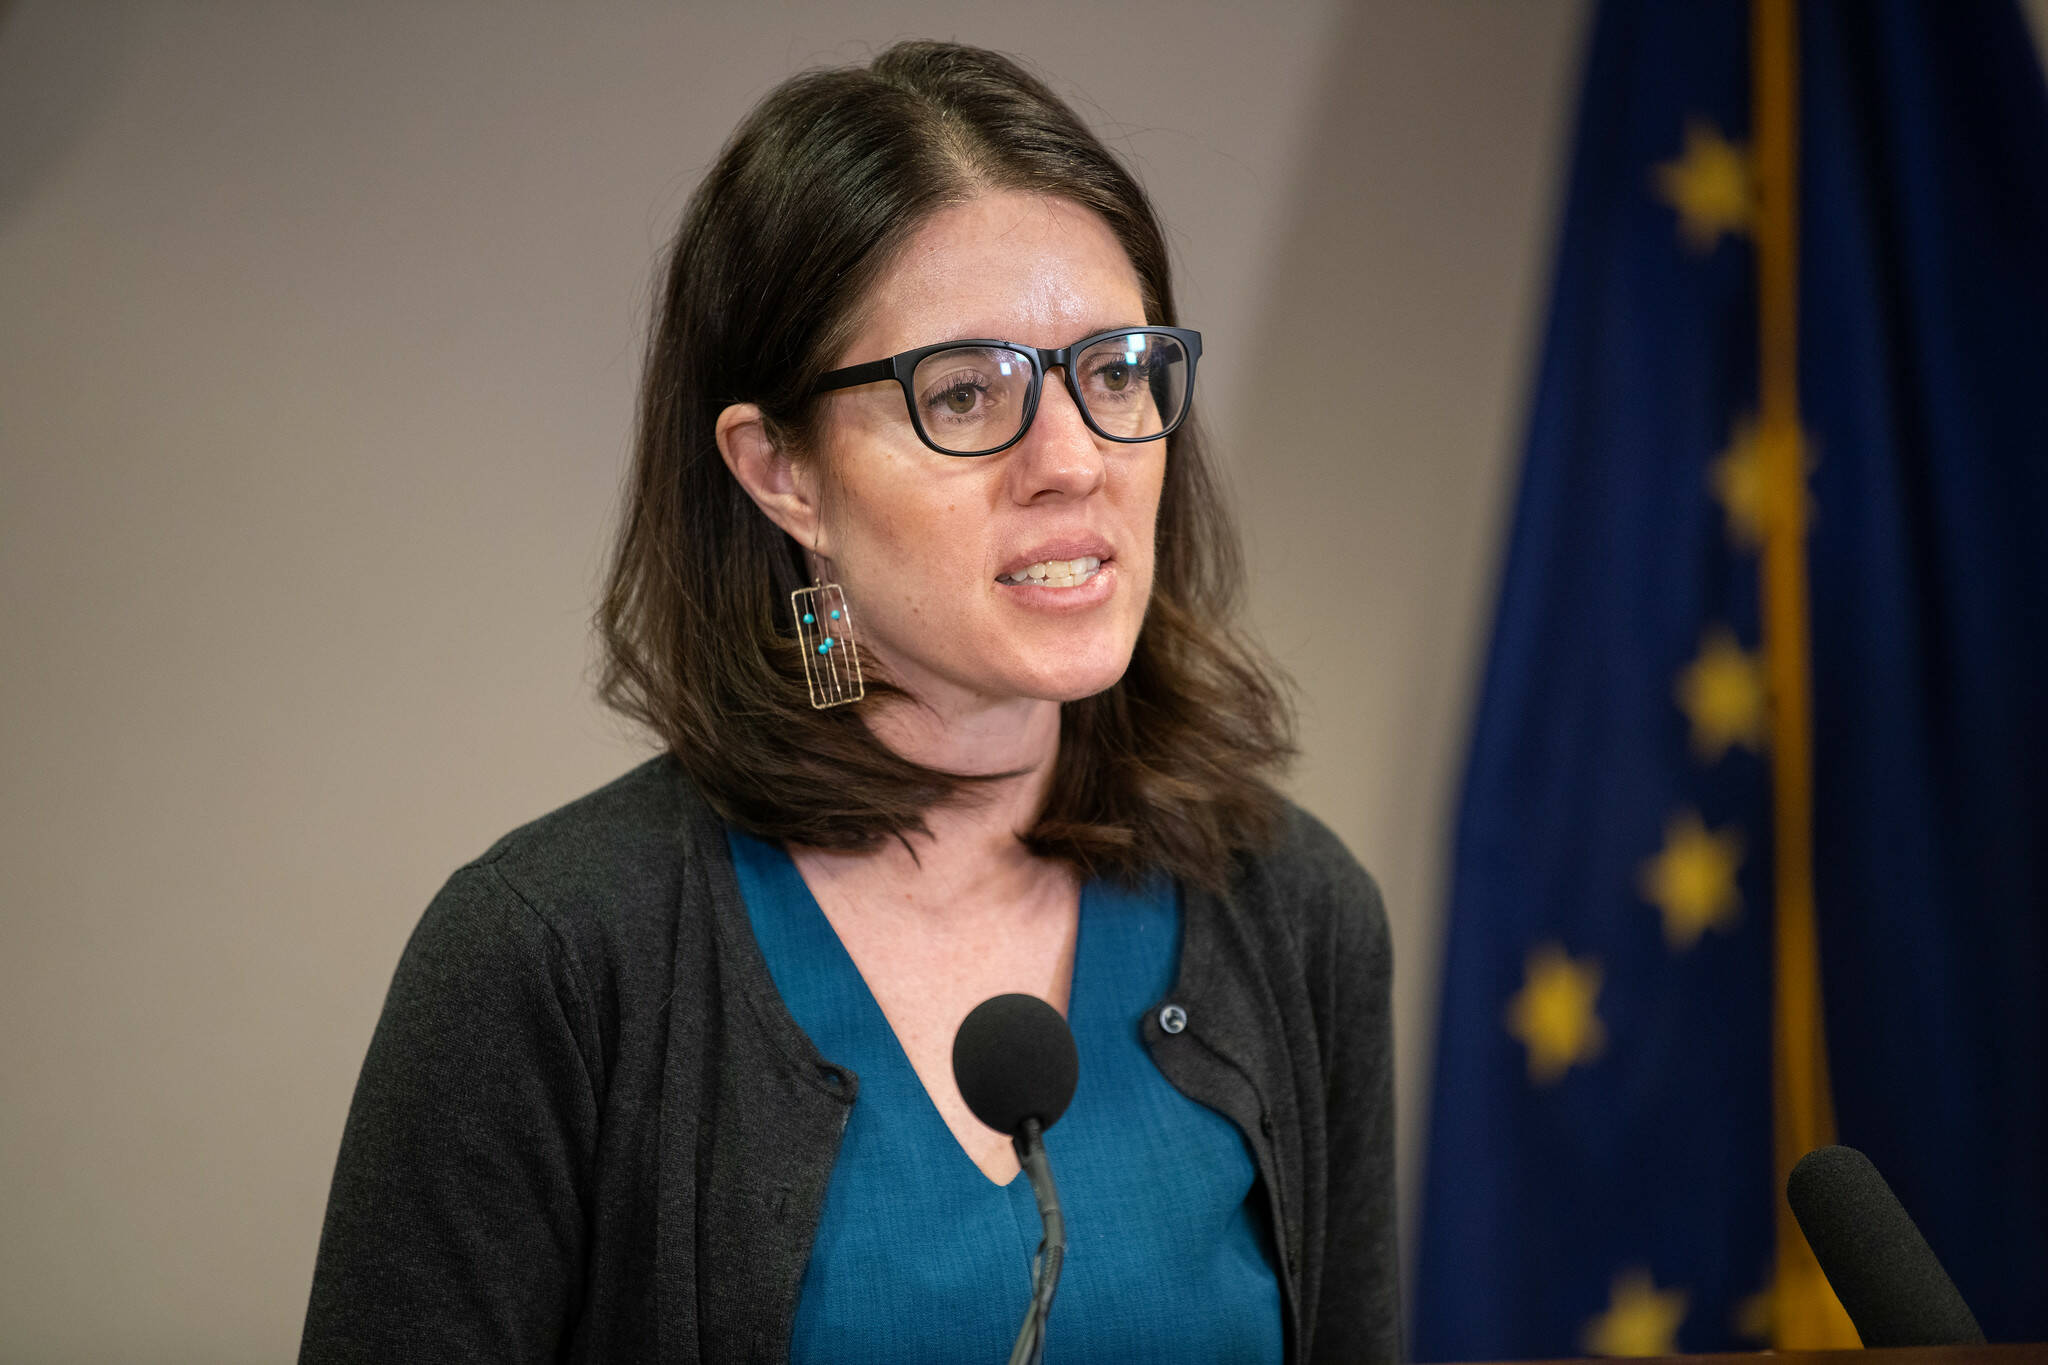 Alaska Chief Medical Officer Dr. Anne Zink speaks at a press conference in Anchorage on March 23, 2020. (Office of Gov. Mike Dunleavy)